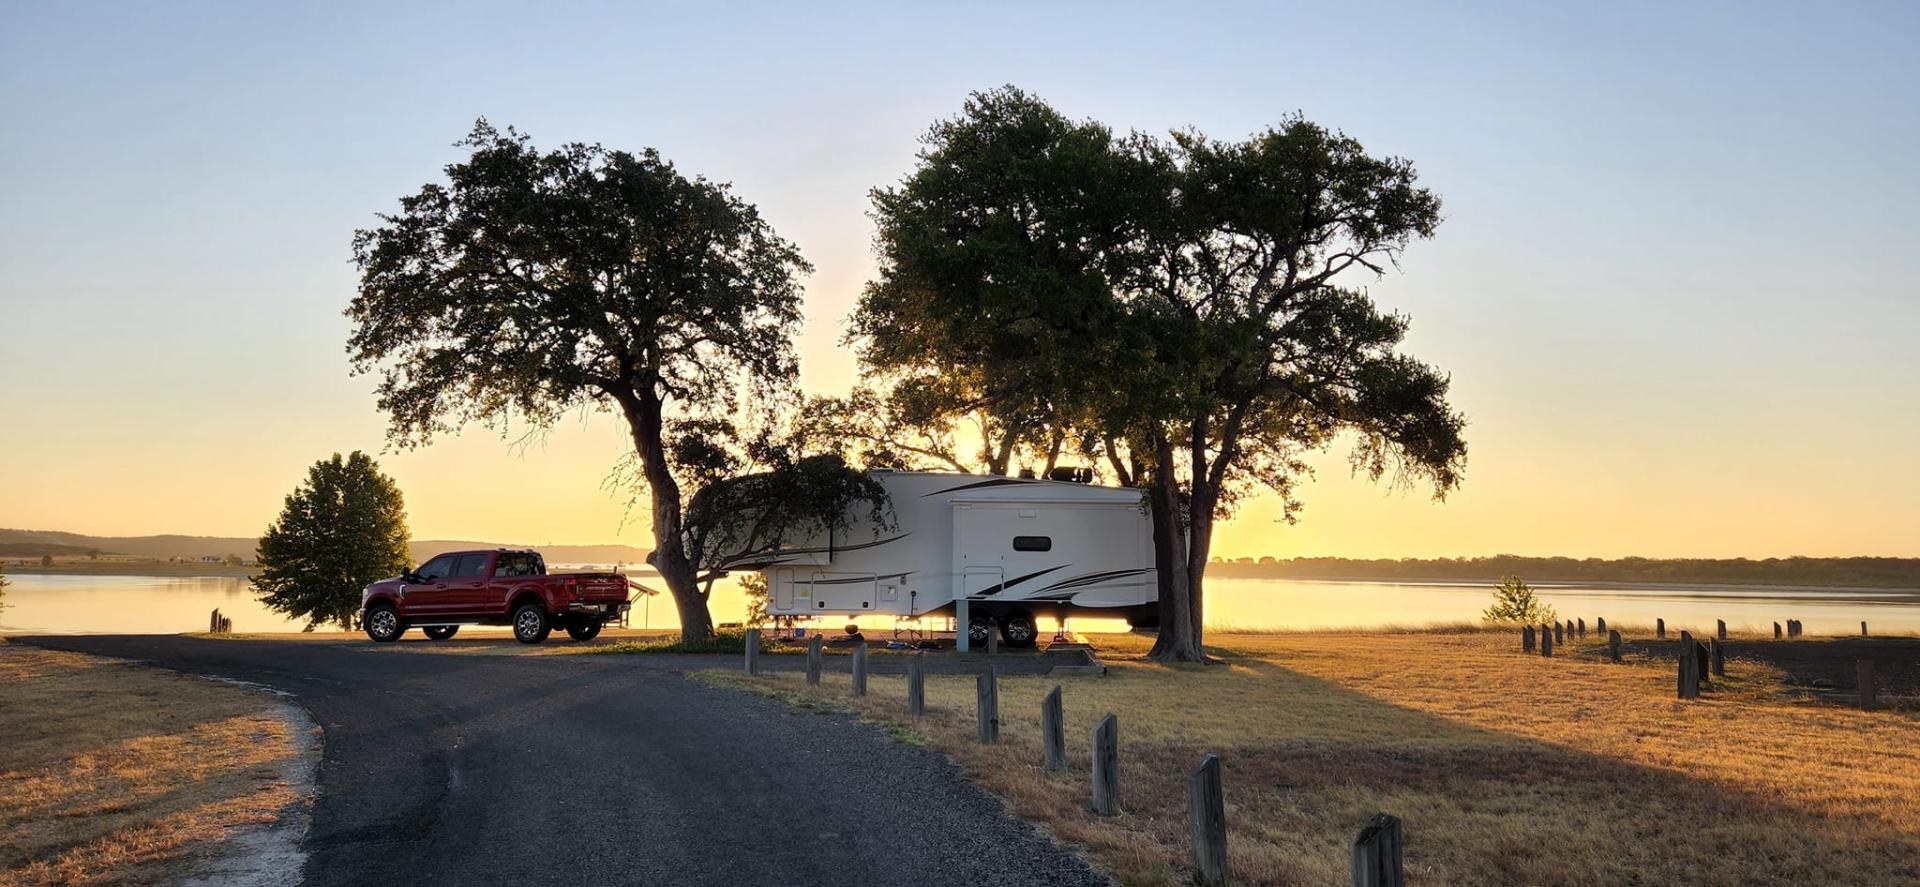 What Are the Benefits of Owning an RV?